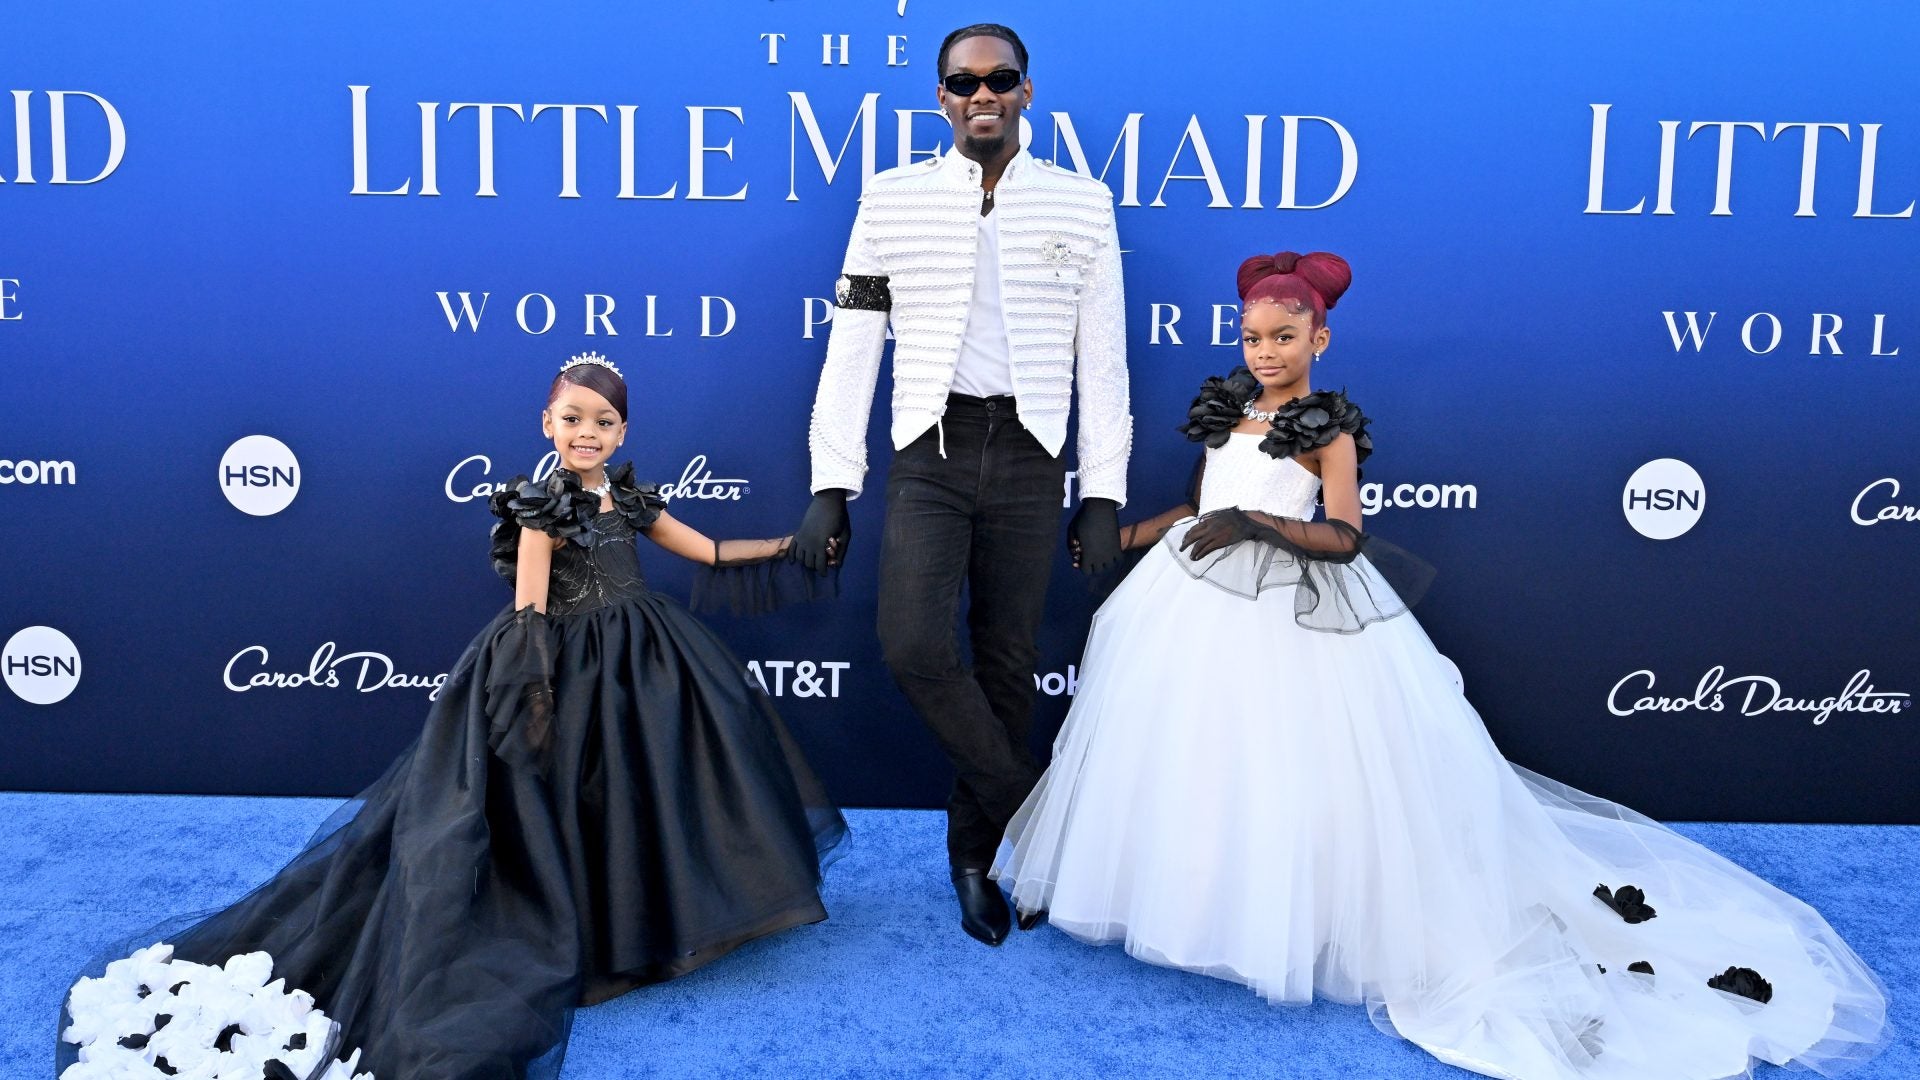 It Was A Family Affair At 'The Little Mermaid' Premiere For These Celebrity Parents And Their Daughters